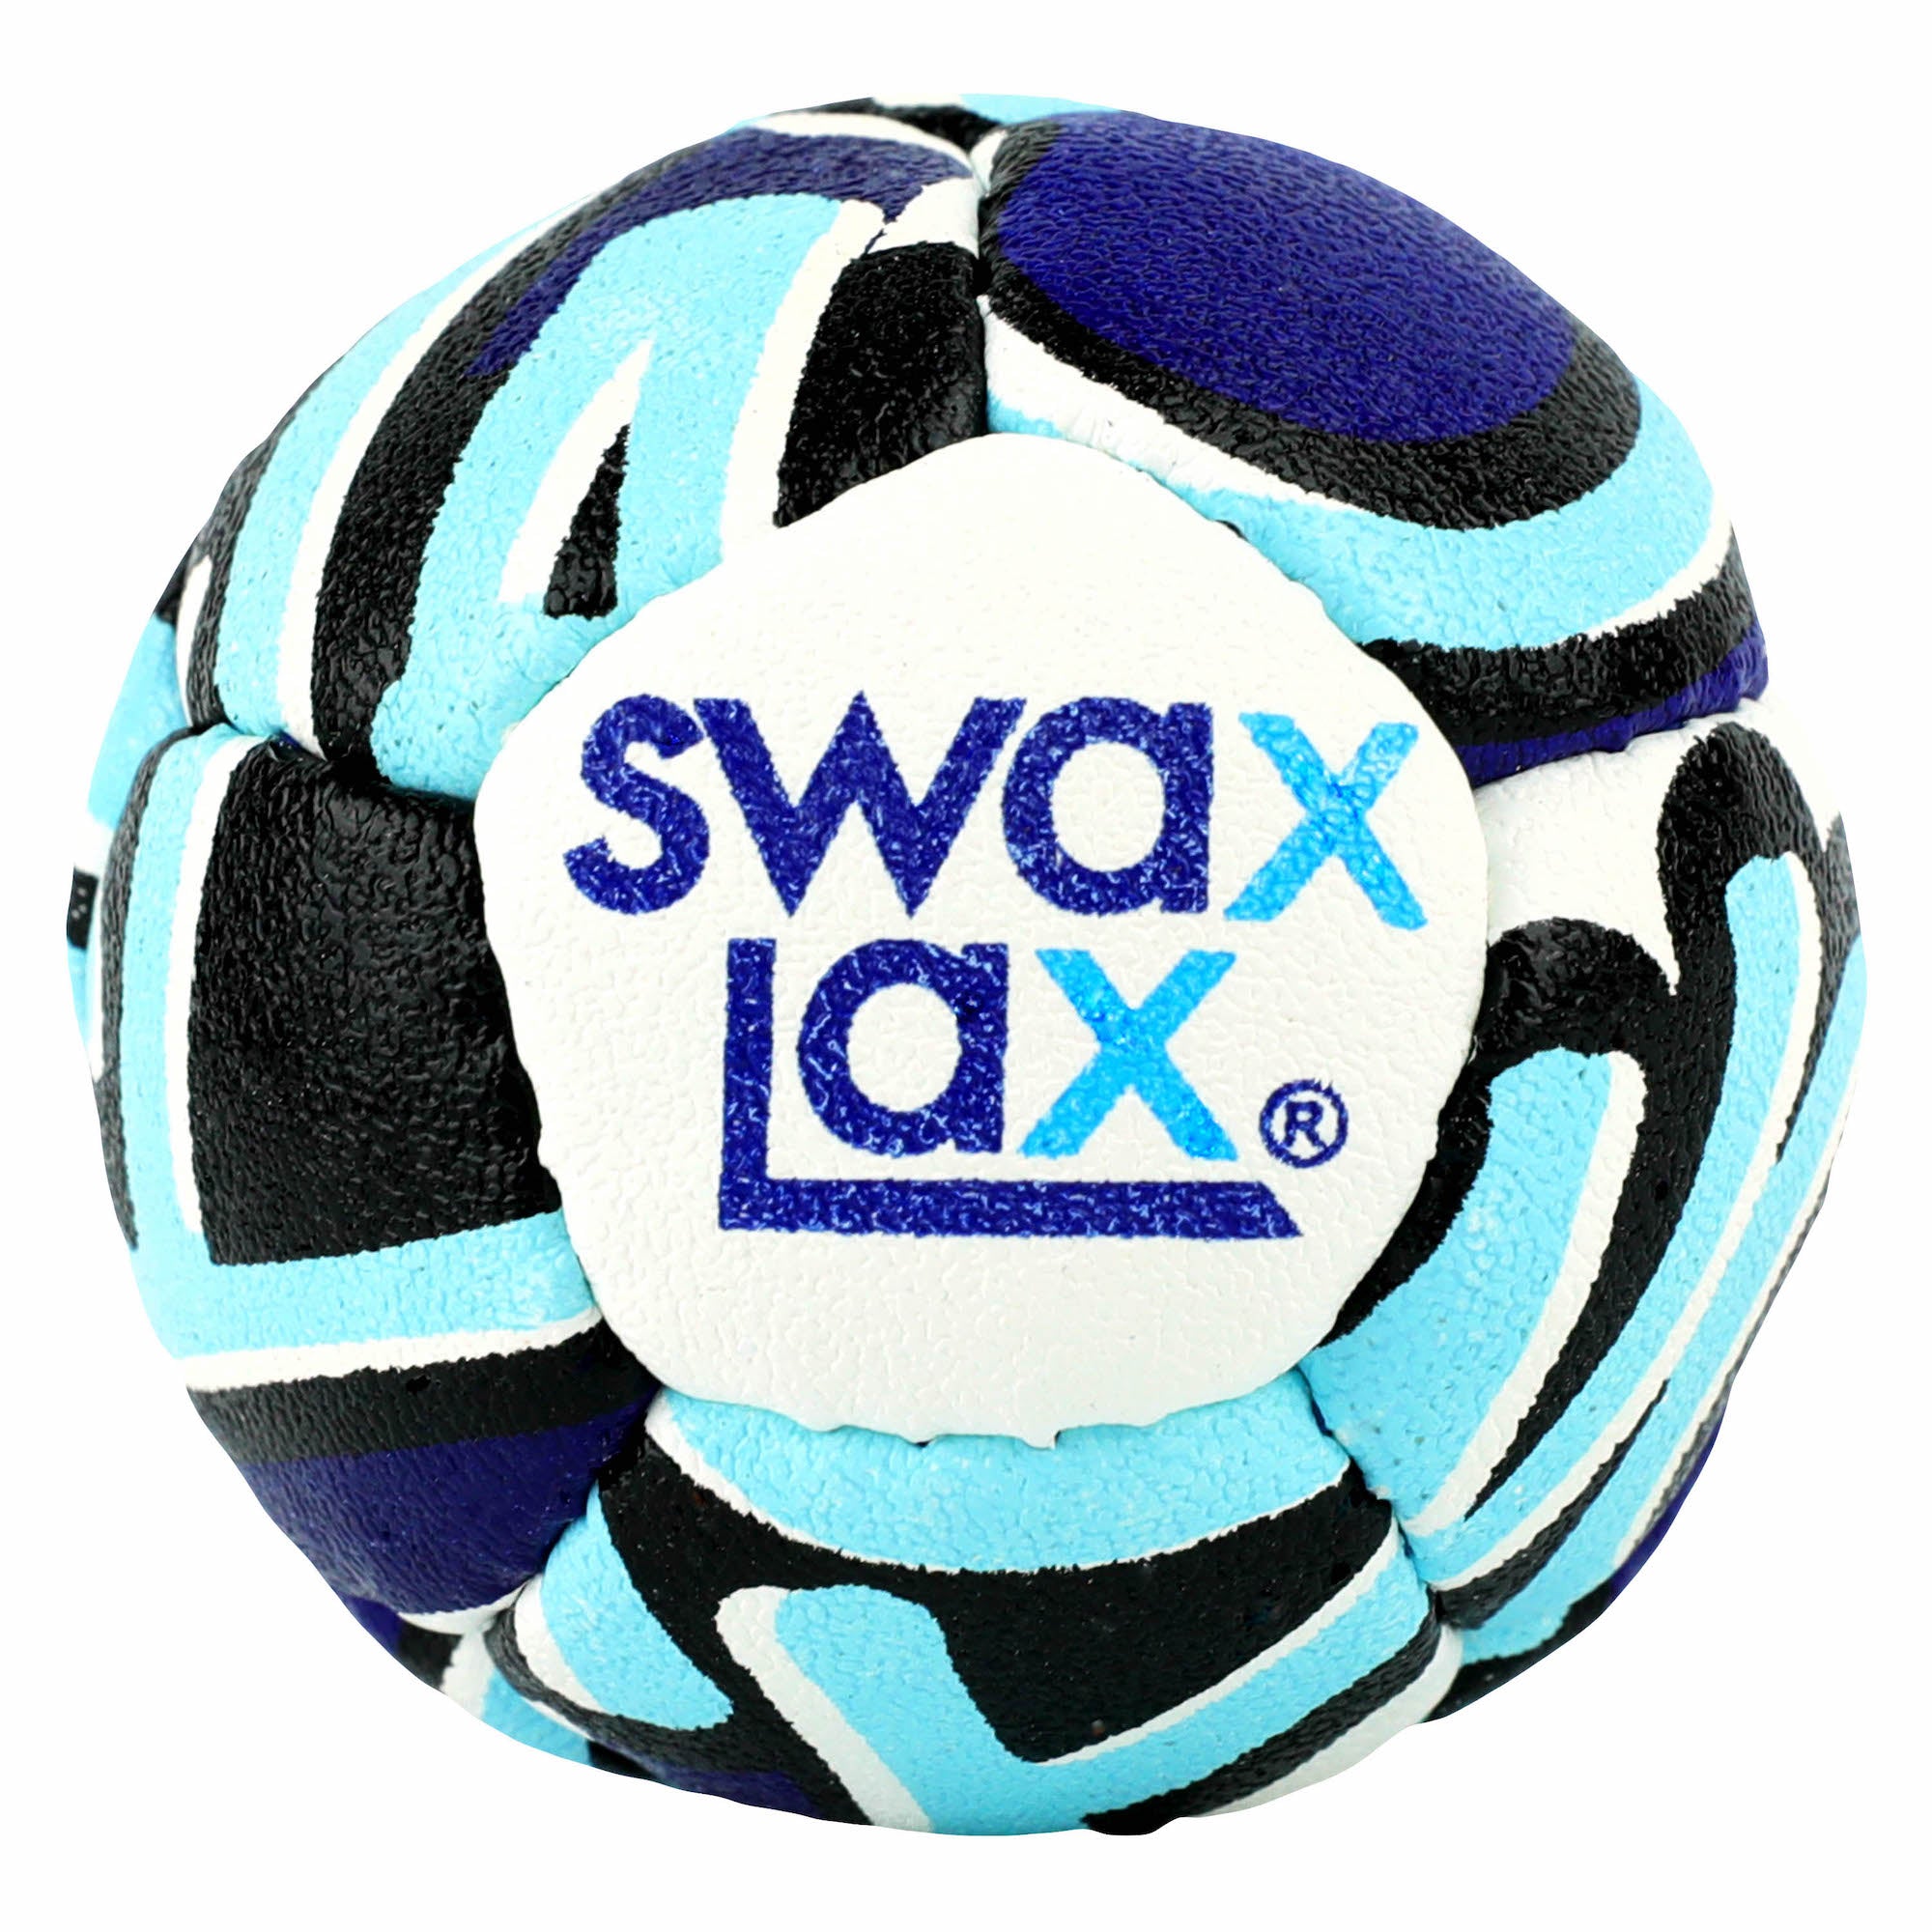 Swax Lax Swax Tag Lacrosse Training Ball